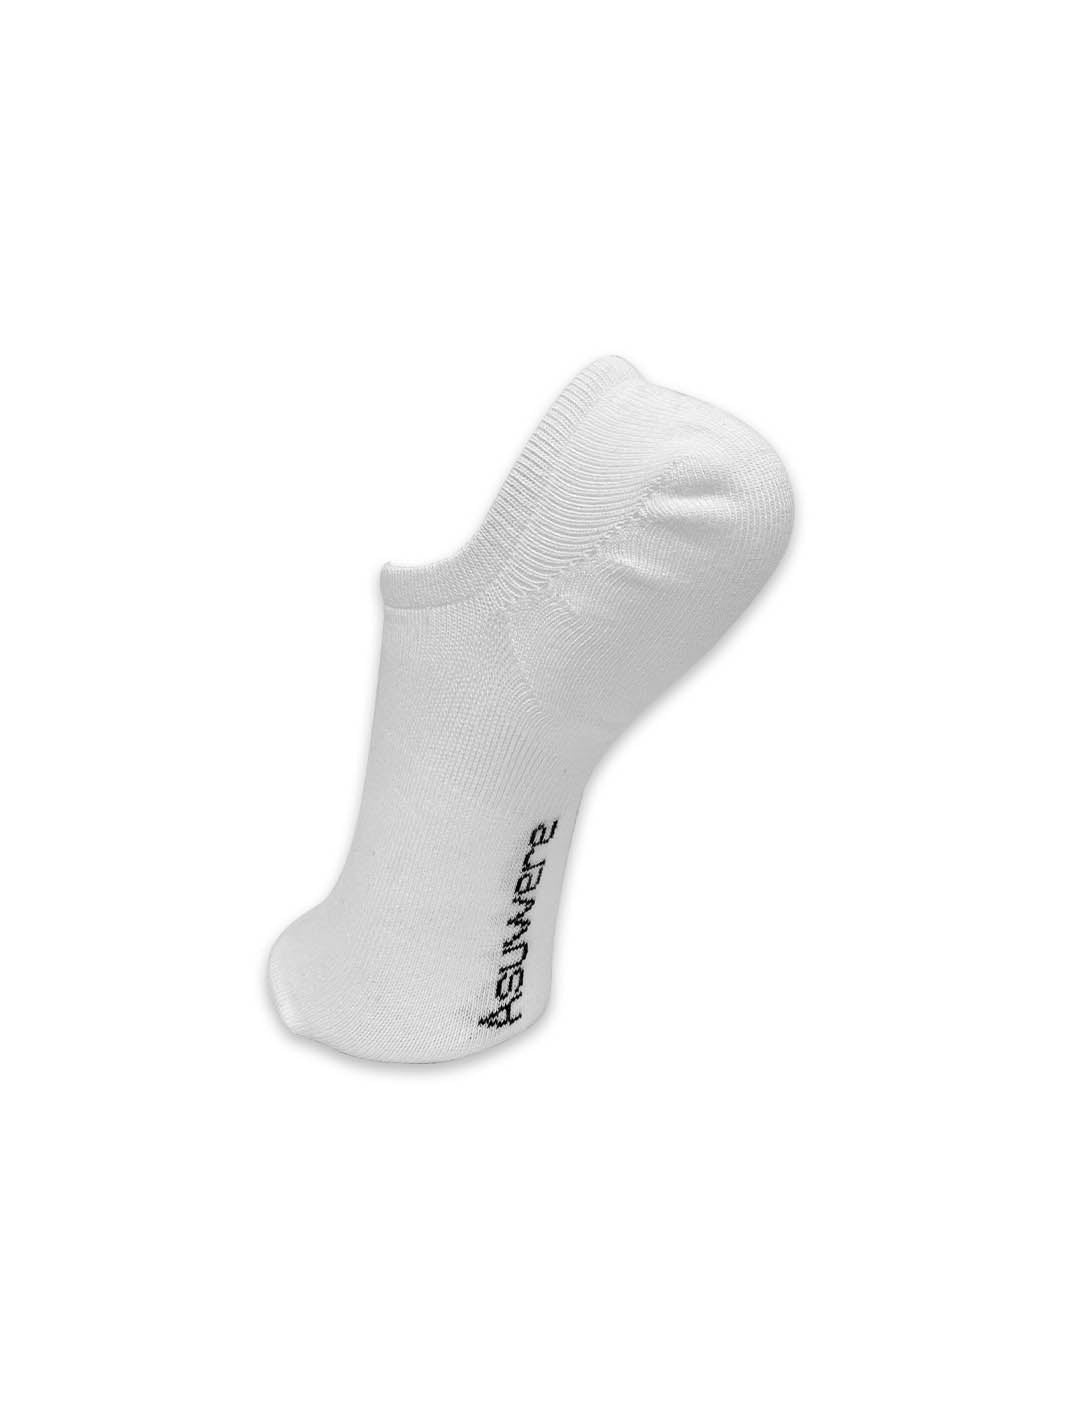 The Low Show Sock - White - 2 x Pair